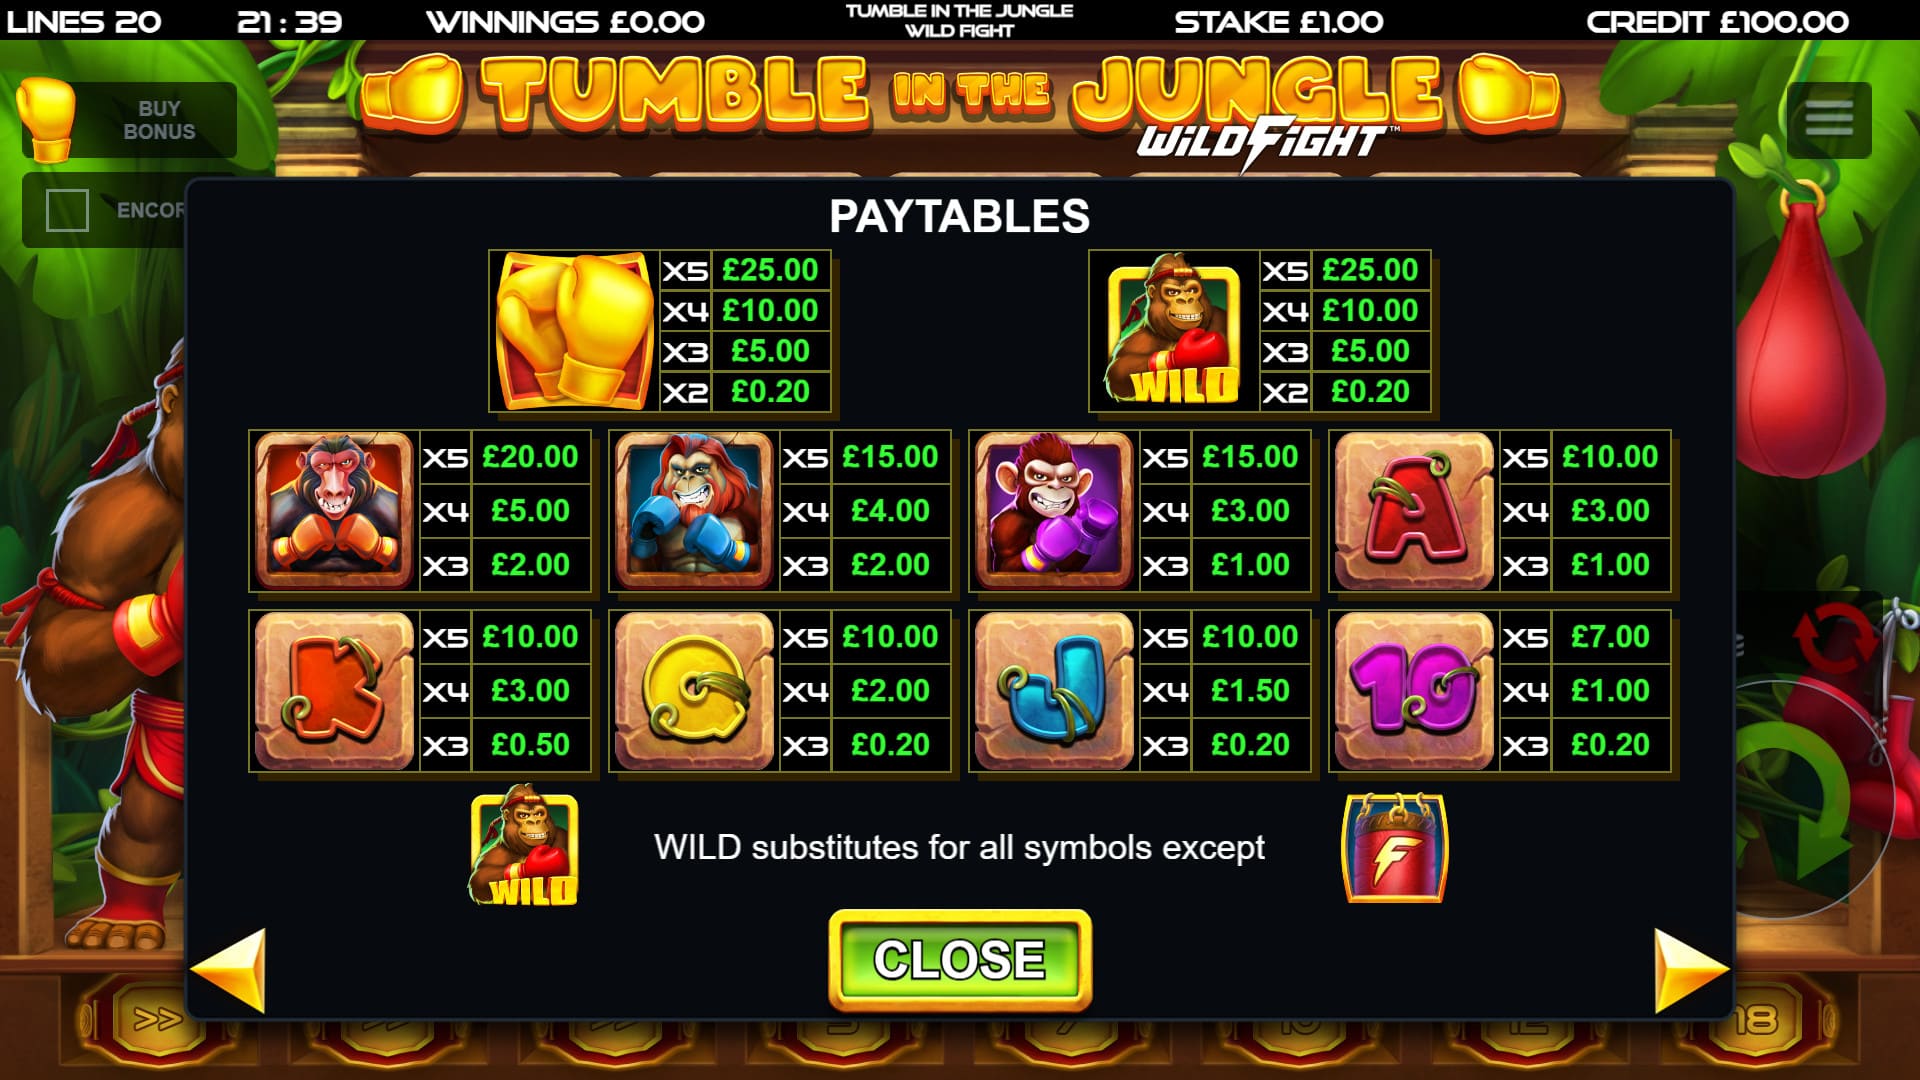 Tumble in the Jungle Wild Hunt - Symbols And Paytable